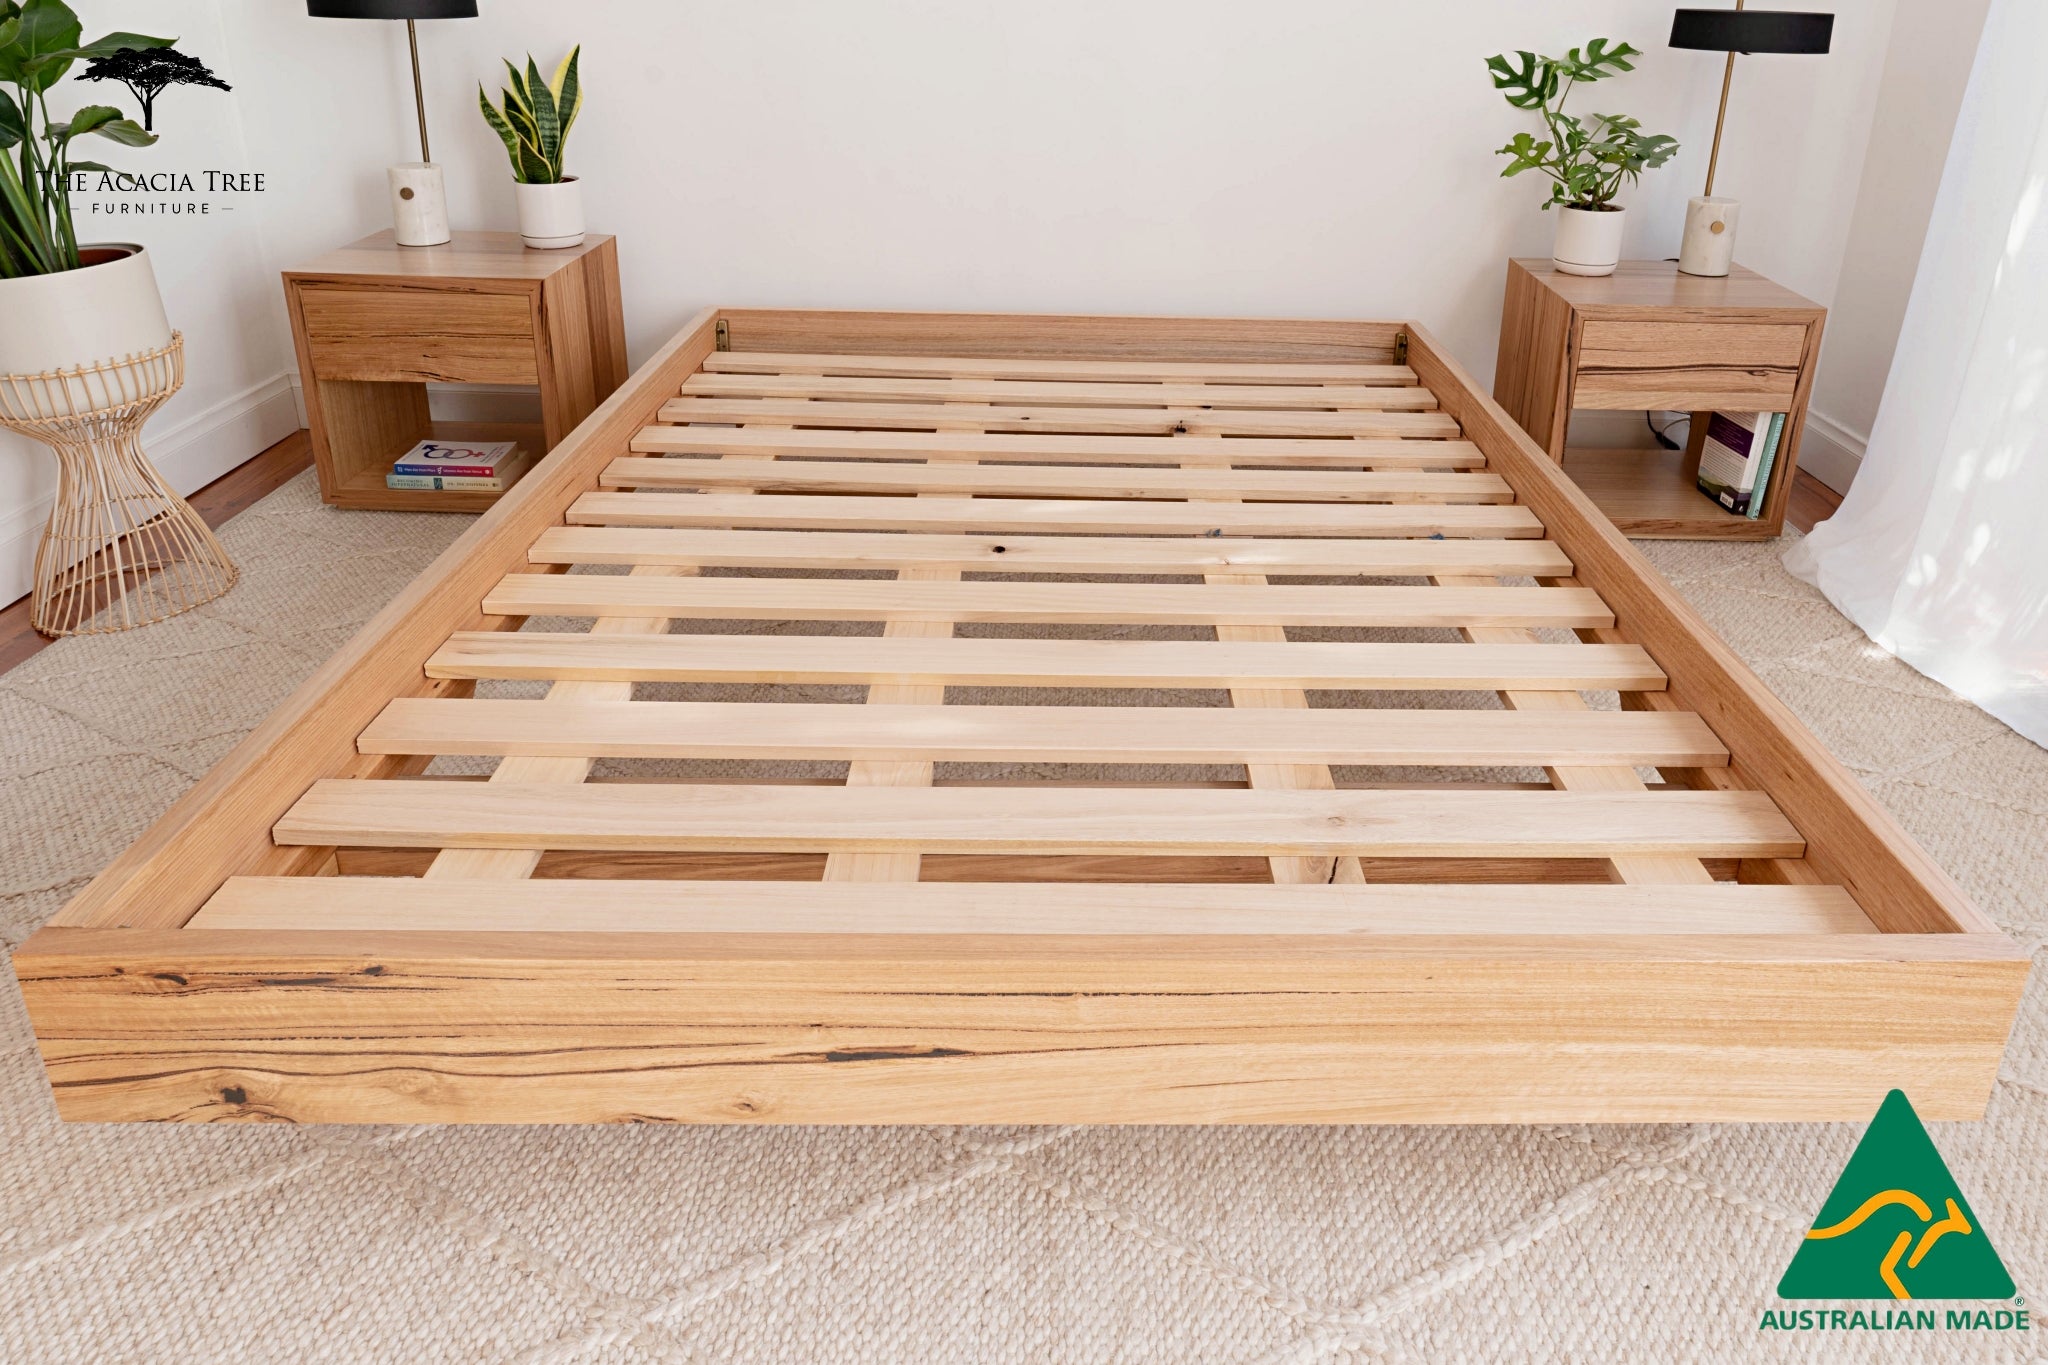 Aurora Floating Bed Frame Fully Solid Australian Hardwood- Made in Mel –  The Acacia Tree